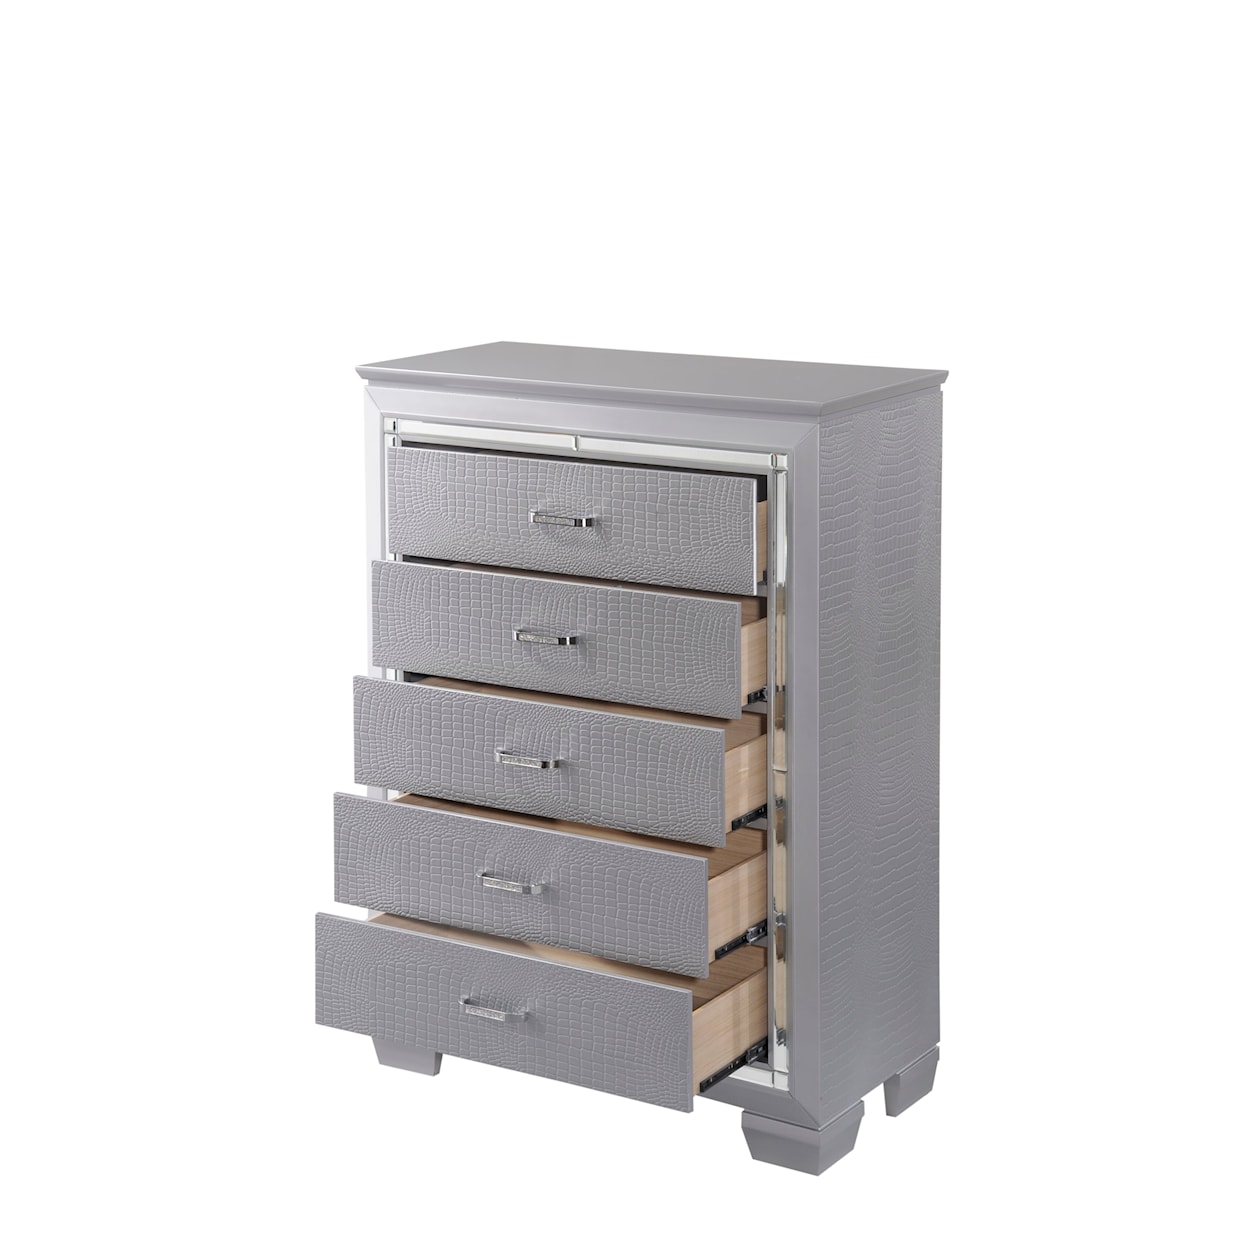 Crown Mark Lillian Chest of Drawers